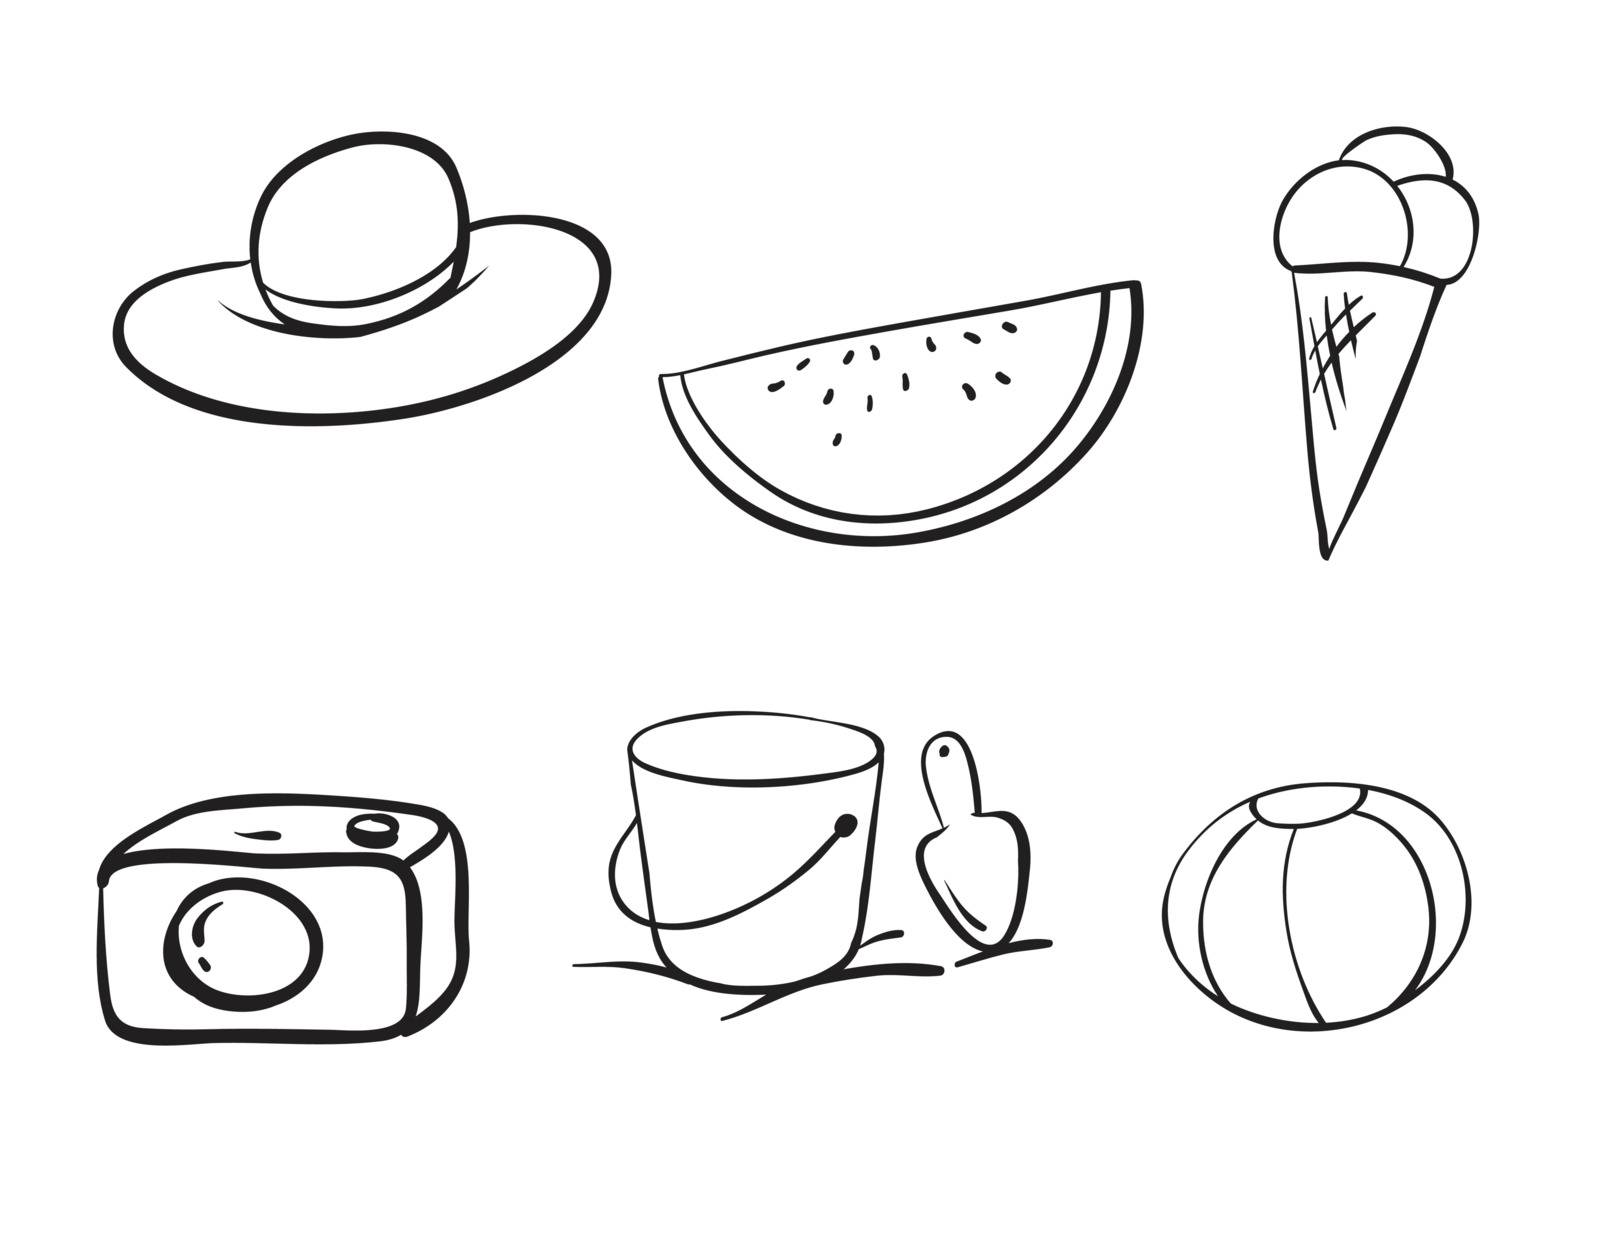 detailed sketches of various objects on a white